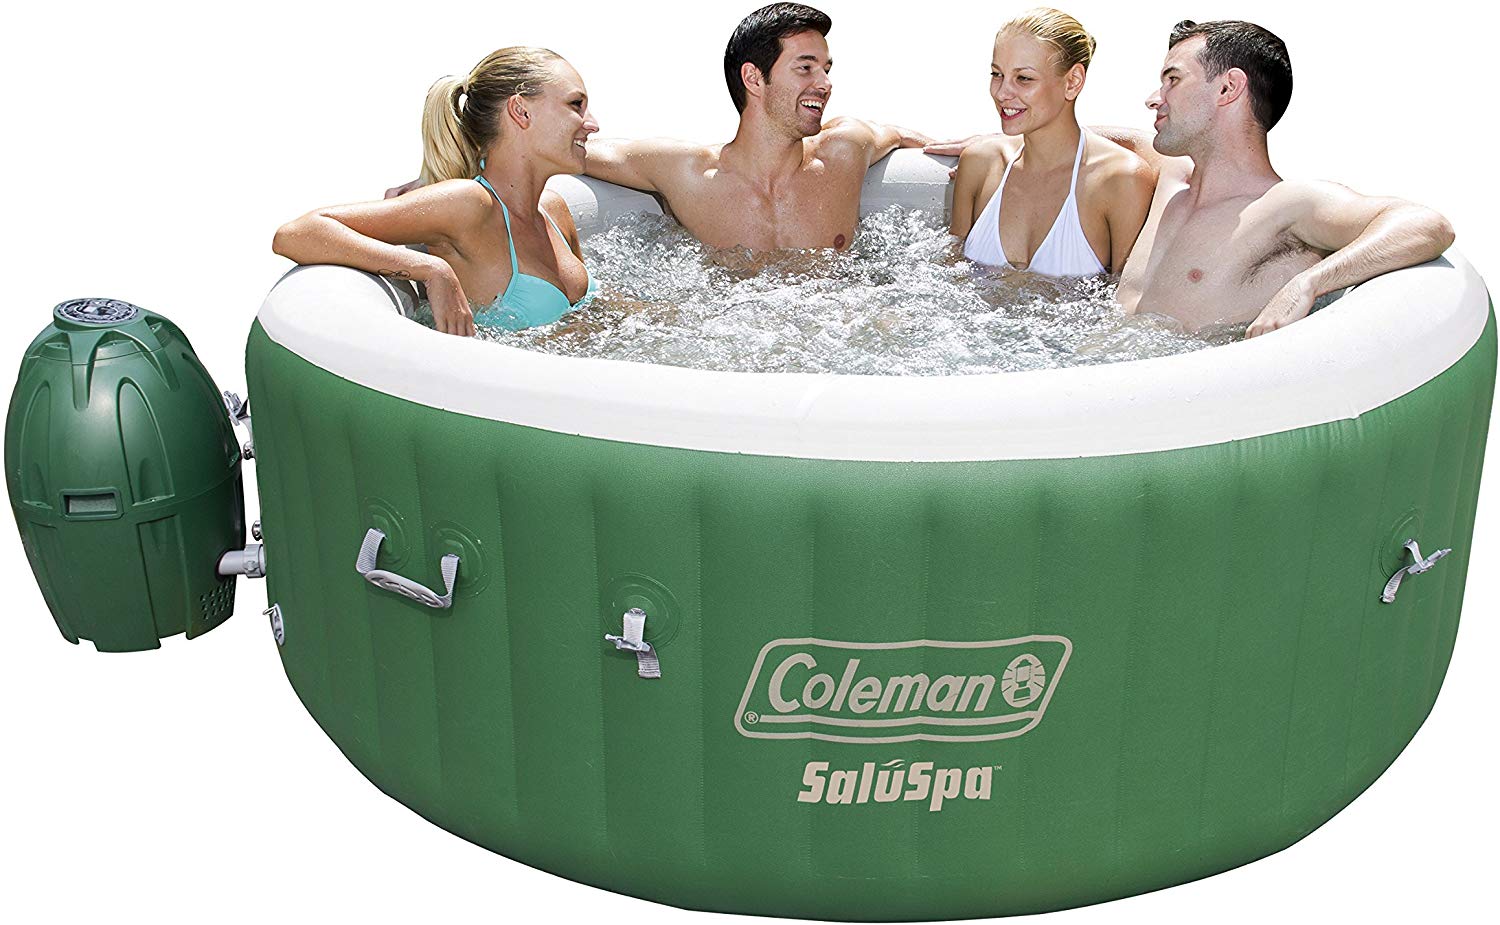 Best Inflatable Hot Tub [review] Blow Up Portable Hottub